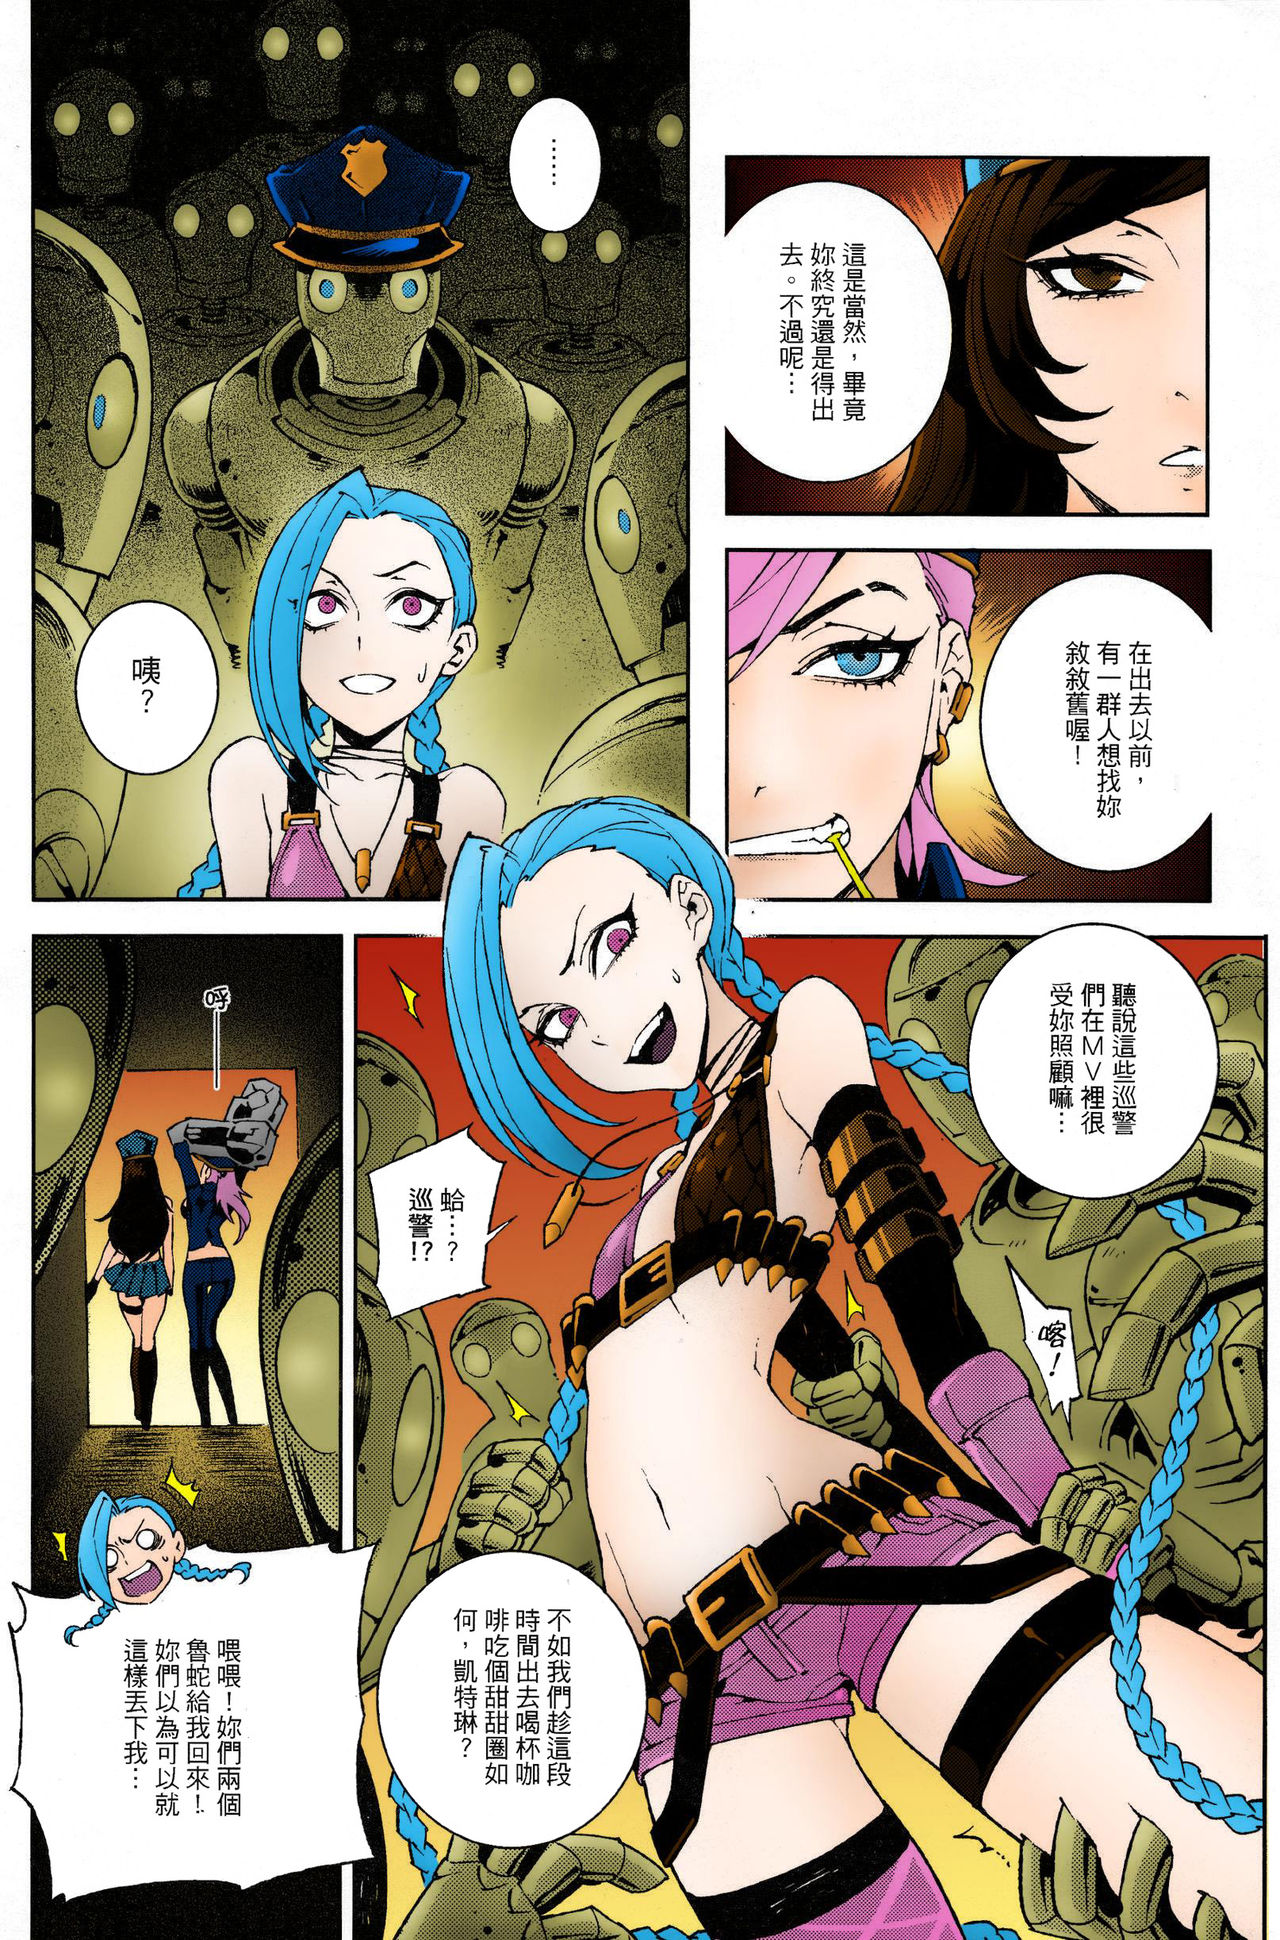 (FF23) [Turtle.Fish.Paint (Hirame Sensei)] JINX Come On! Shoot Faster (League of Legends) [Chinese] [colorized] (FF23) [Turtle.Fish.Paint (比目魚先生)] JINX Come On! Shoot Faster (リーグ・オブ・レジェンズ) [中国語] [カラー化]